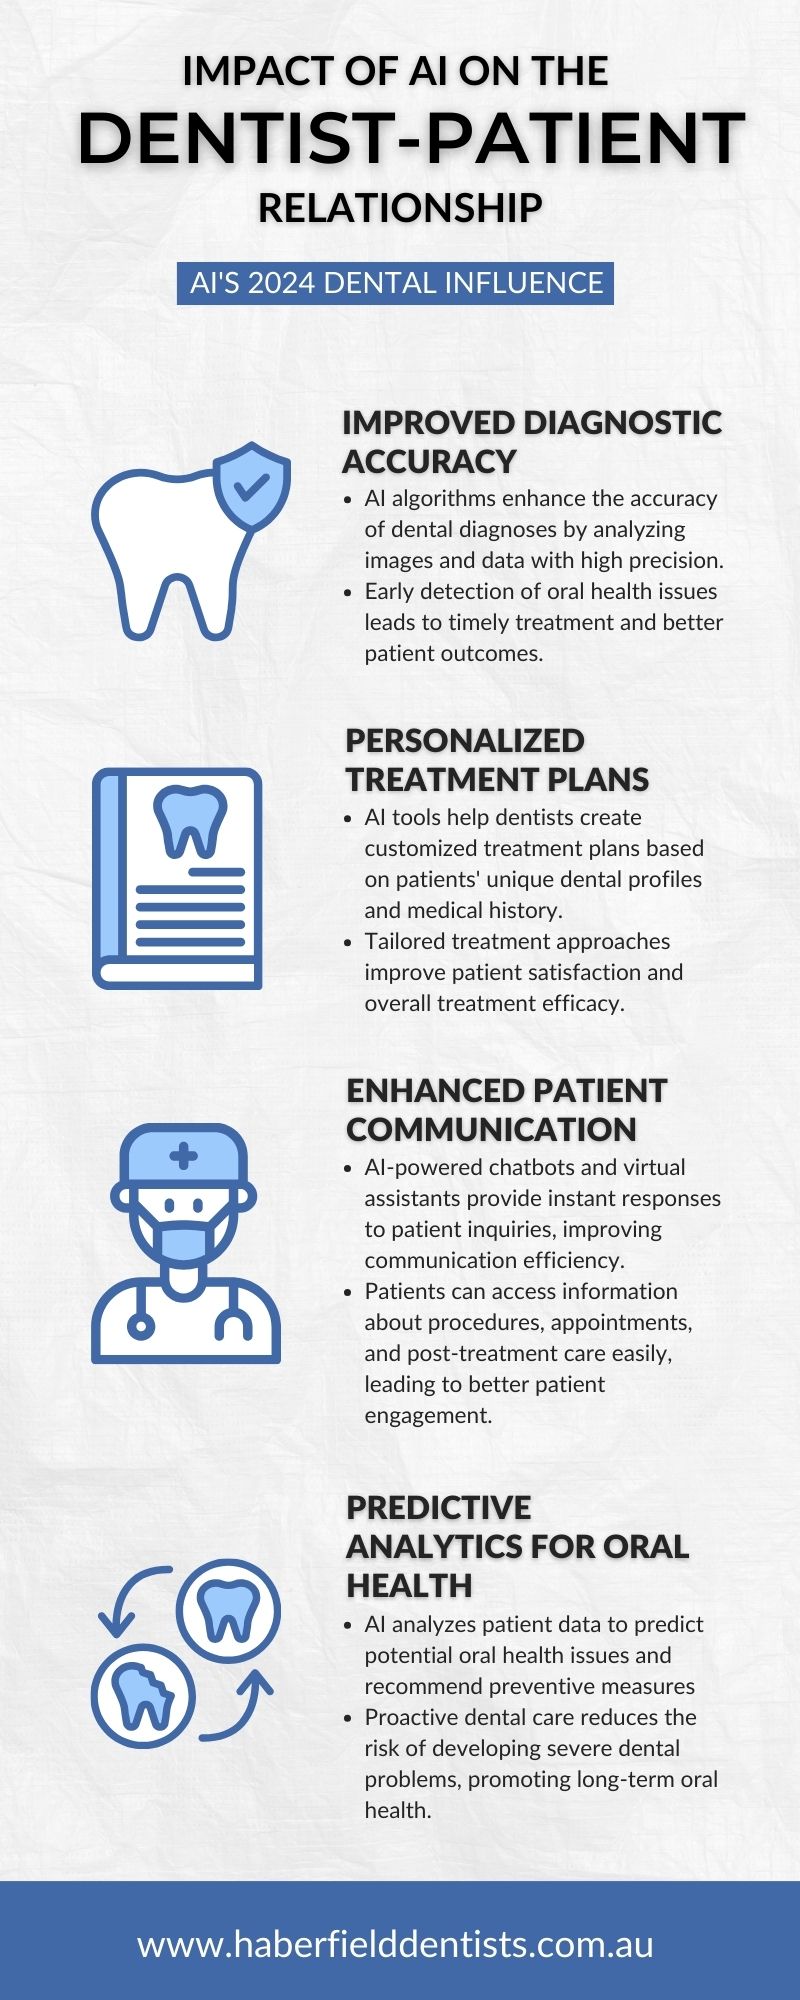 Impact of AI on the Dentist-Patient Relationship AI's 2024 Dental Influence